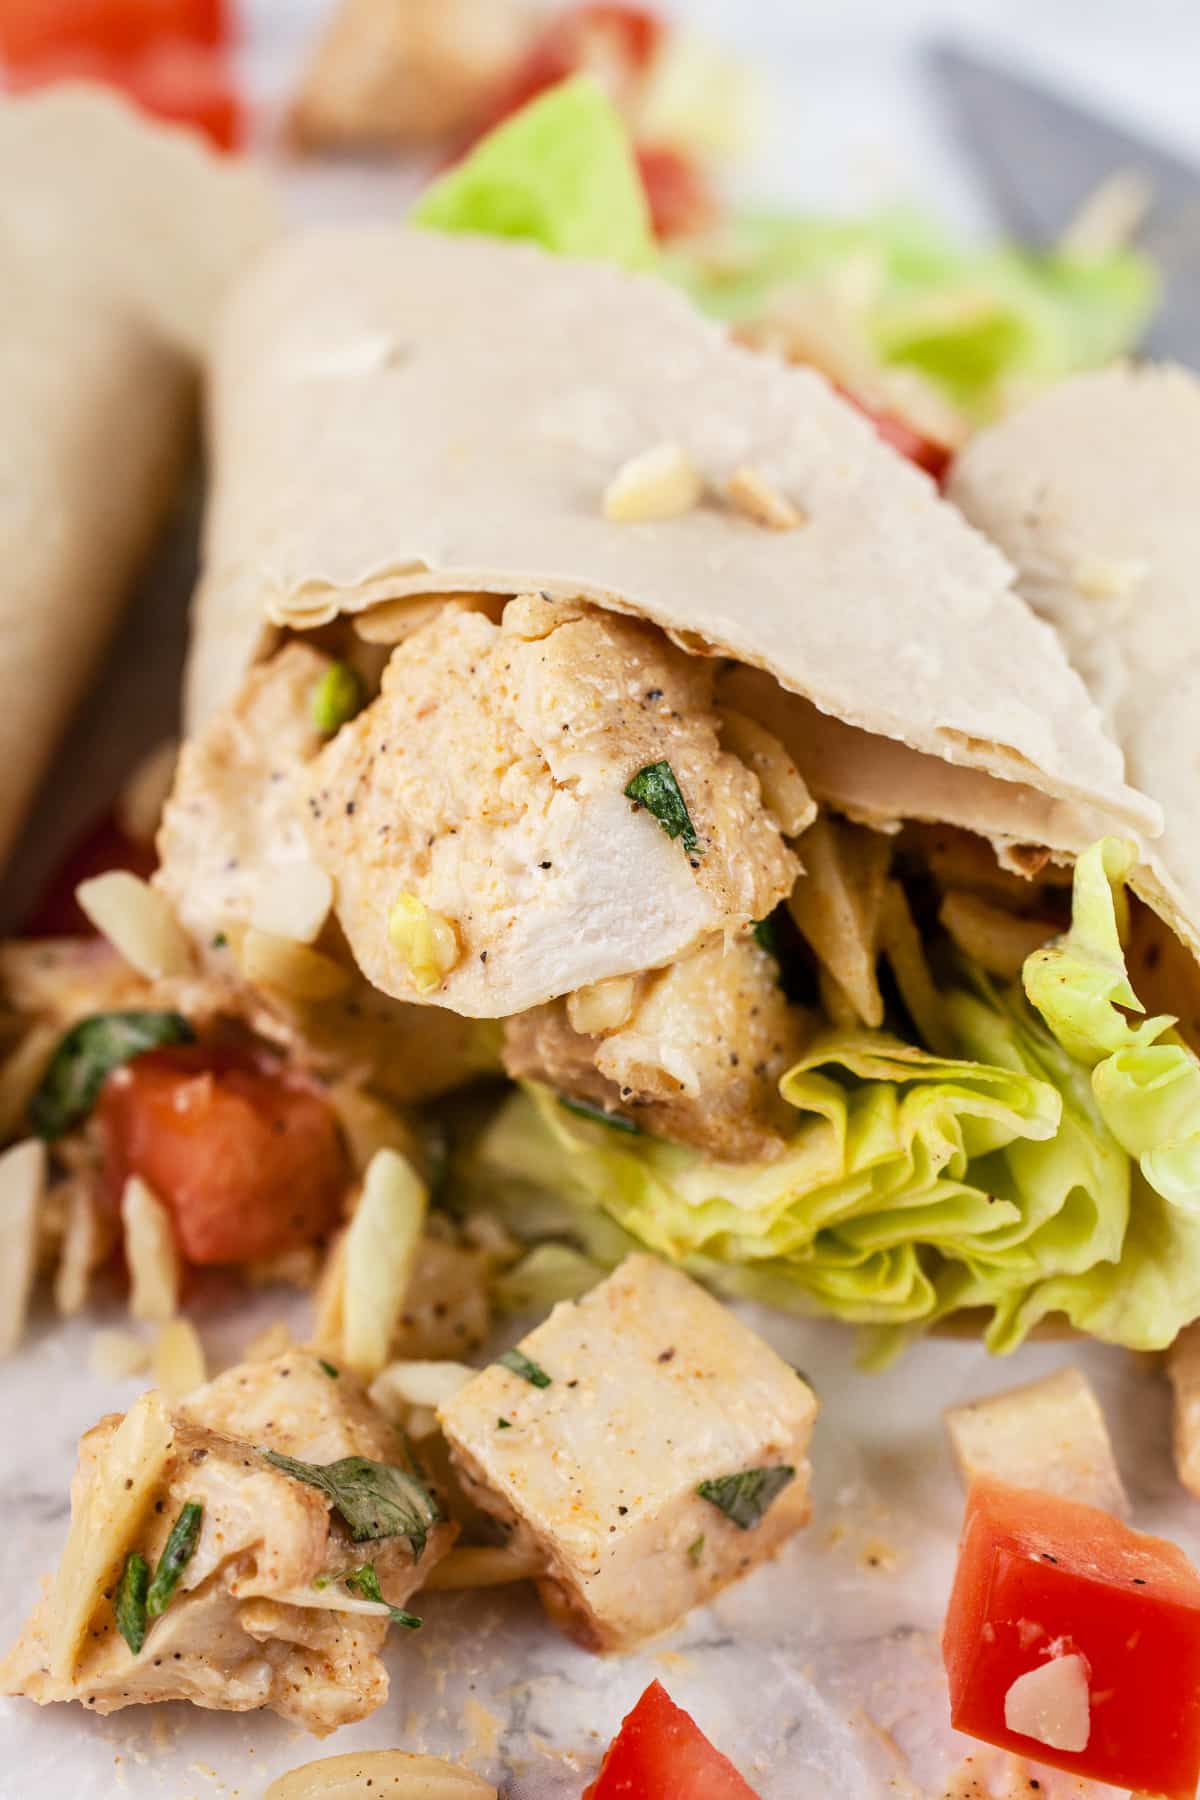 Tarragon chicken salad in wraps with diced tomatoes and lettuce.